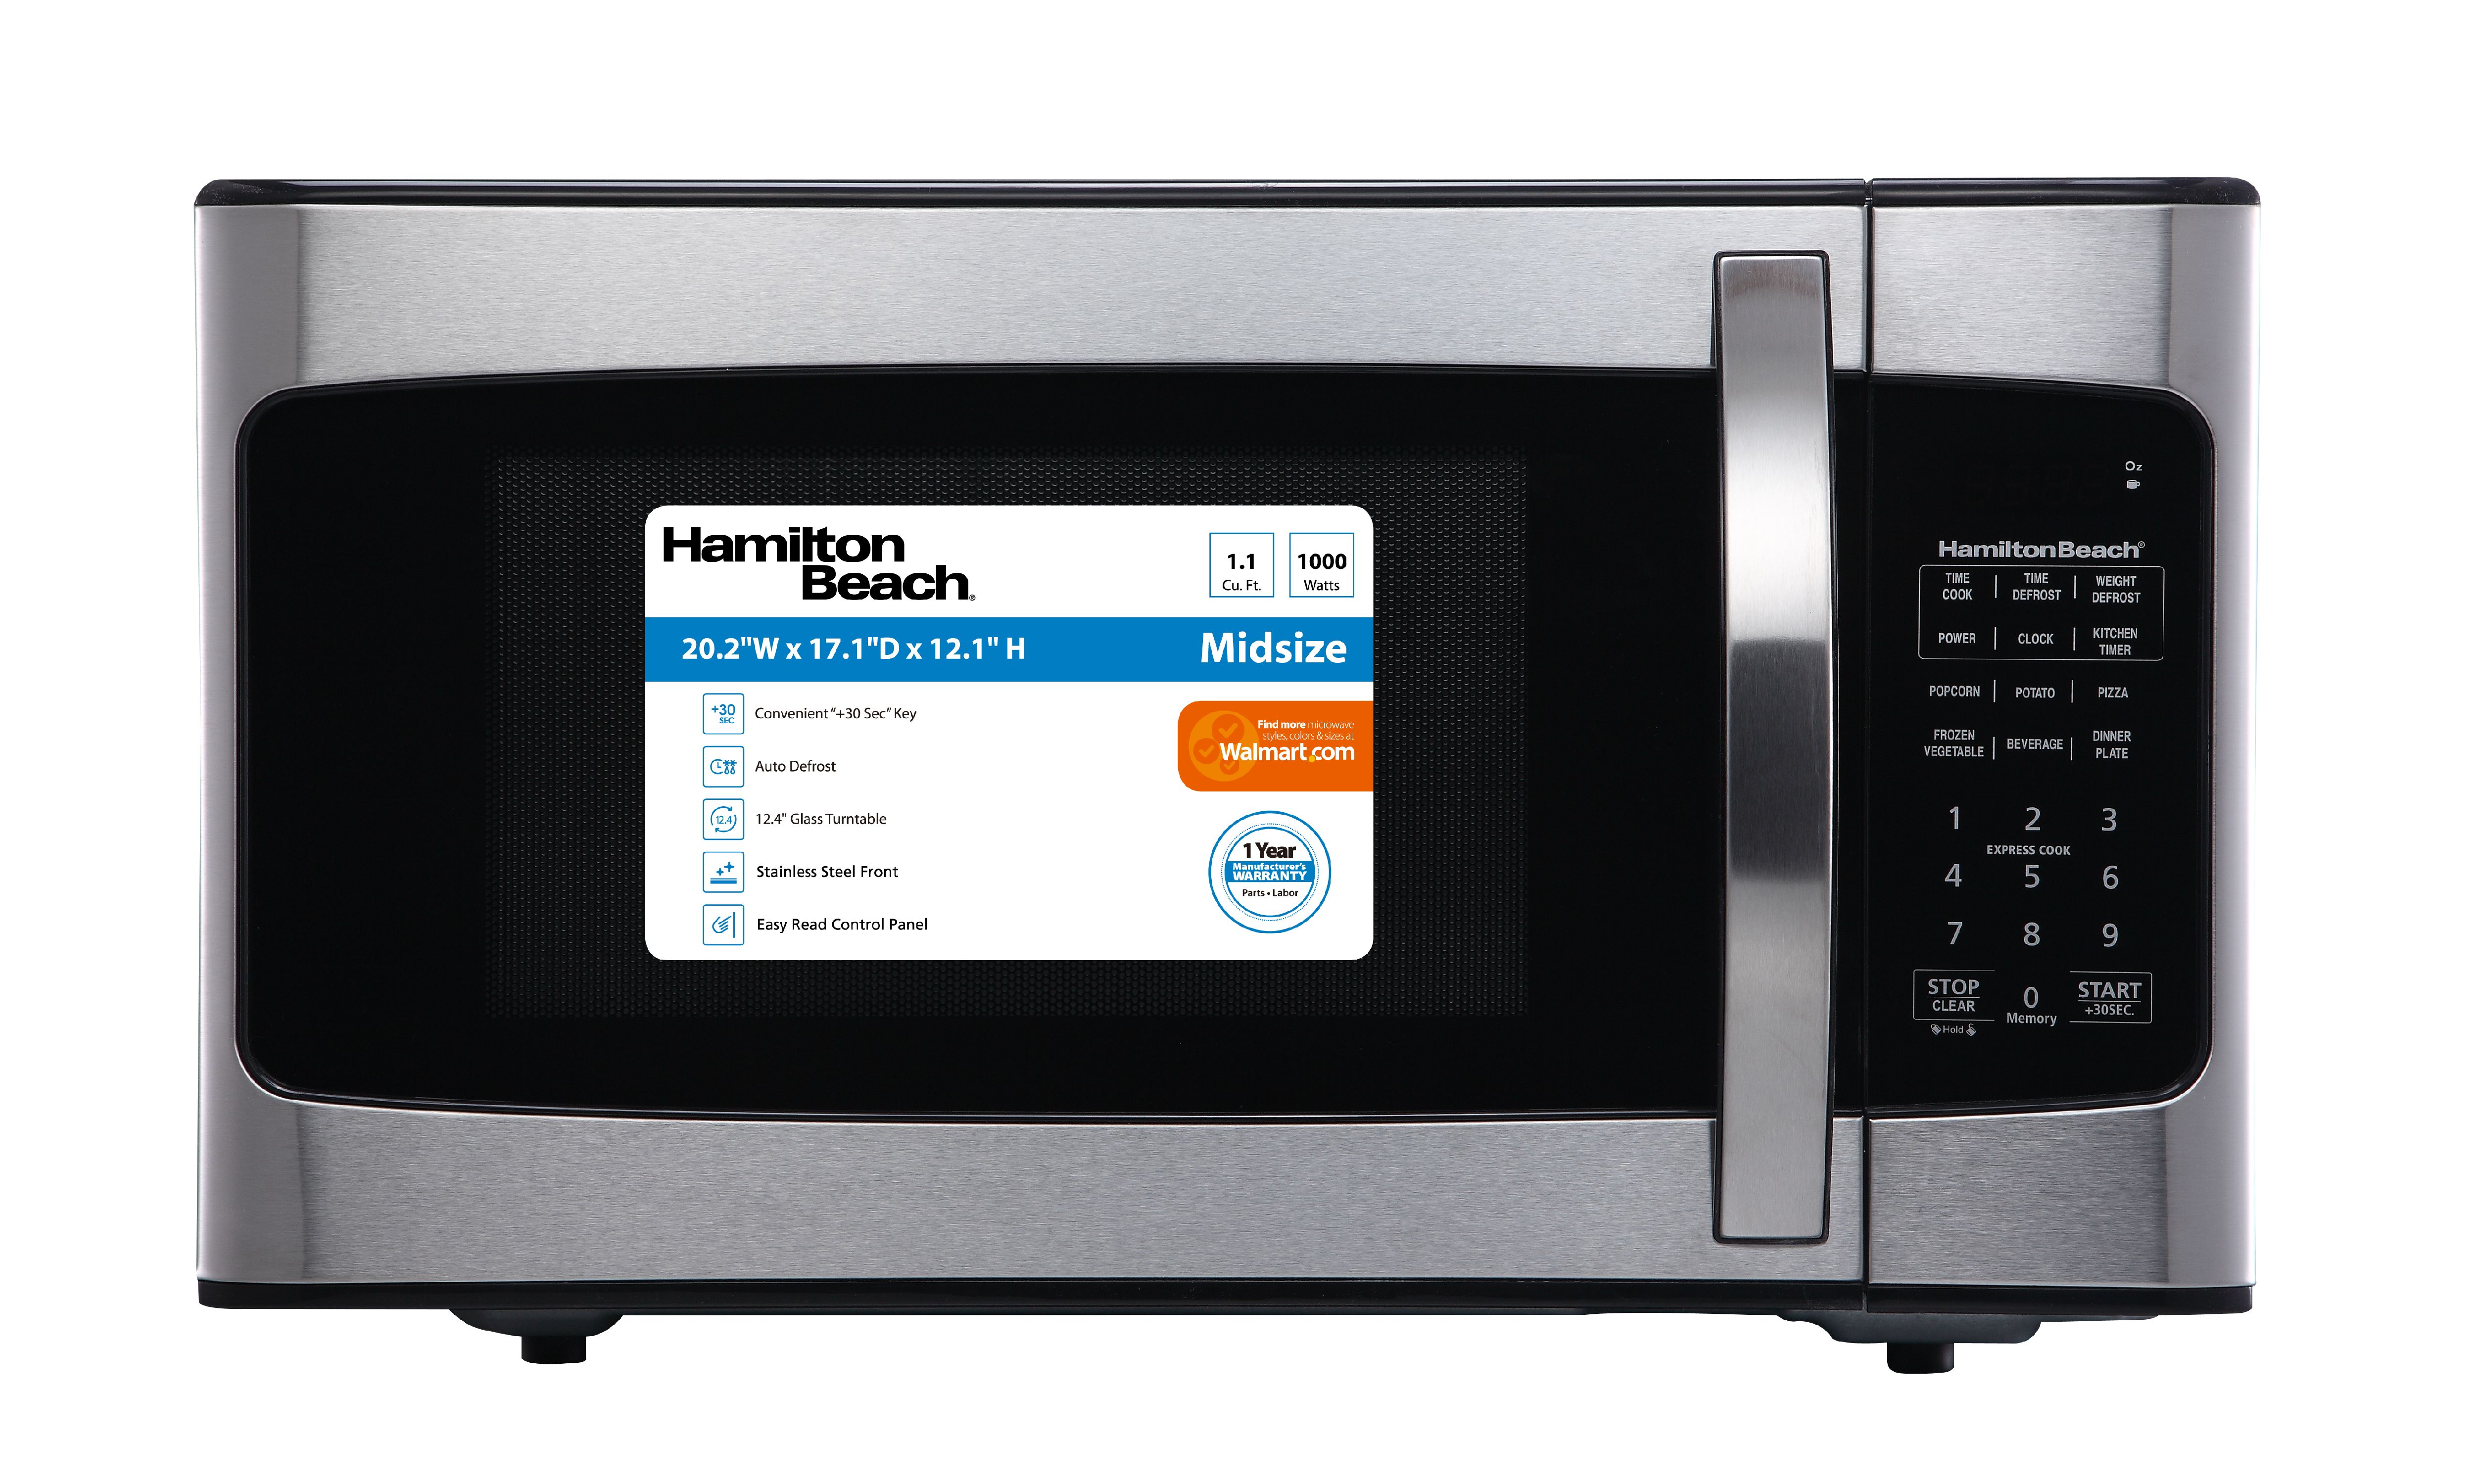 Hamilton Beach 1.1 Cu. Ft. 1000W Stainless Steel Microwave - image 5 of 6